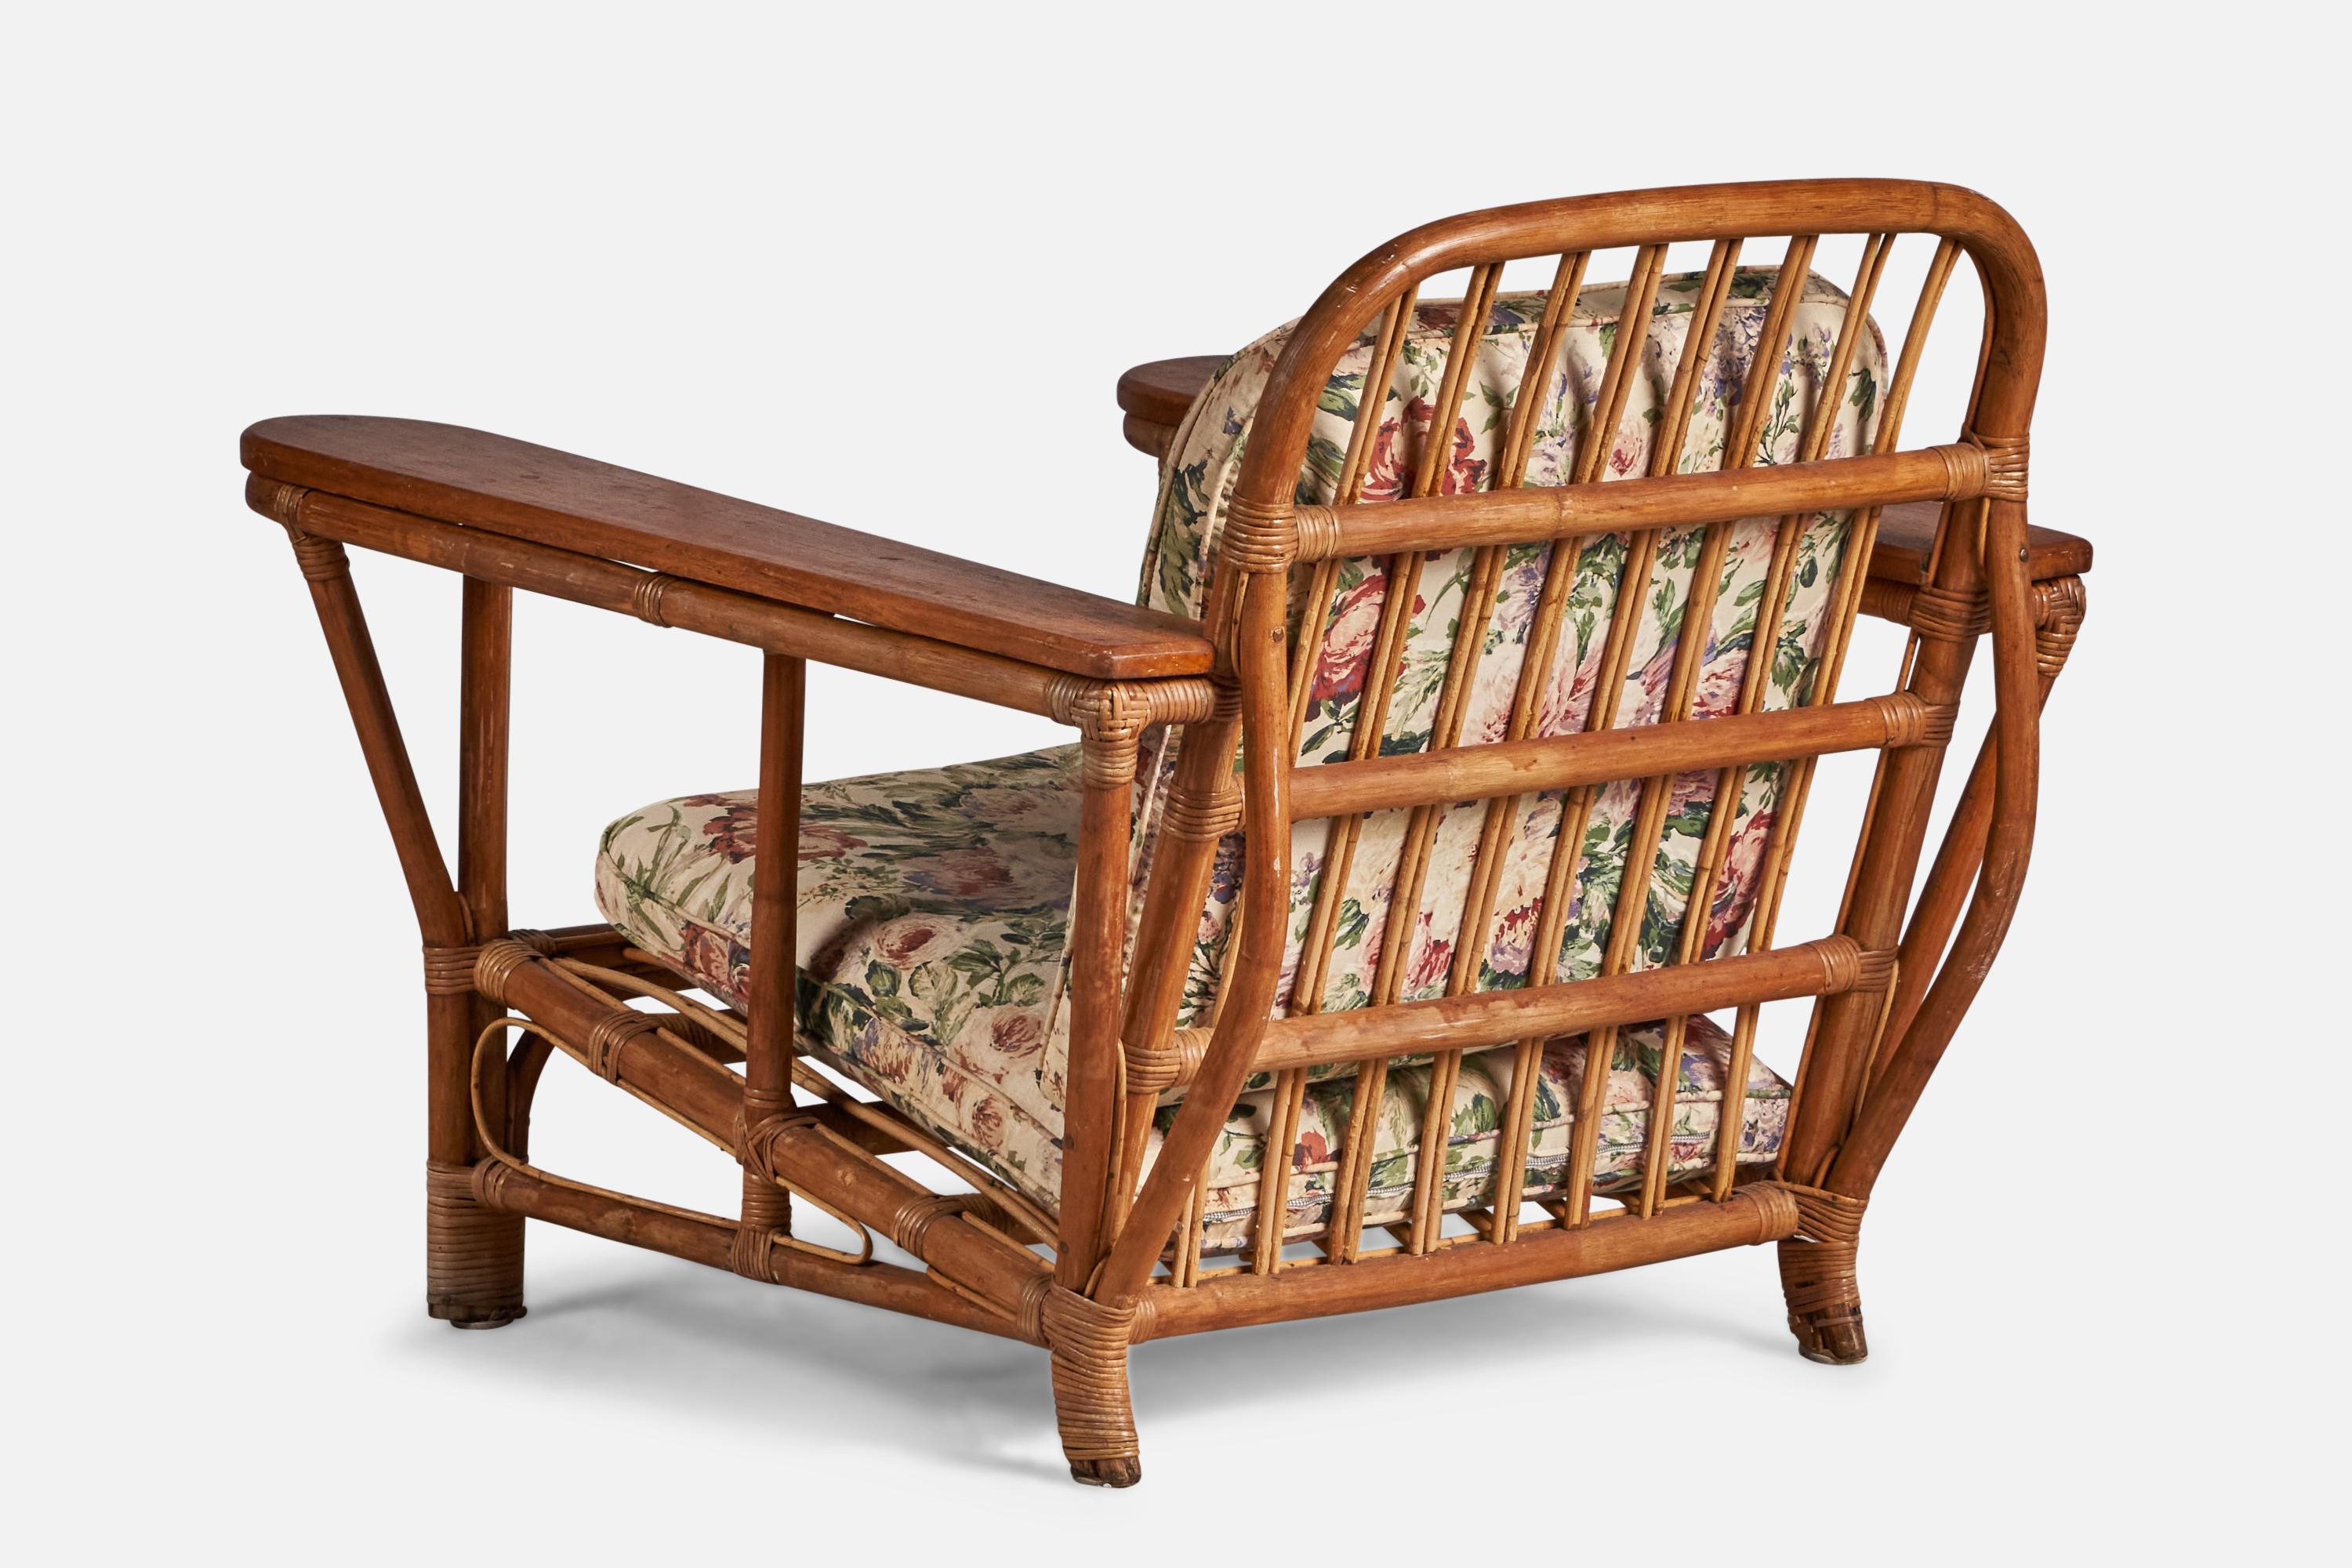 American Designer, Lounge Chair, Bamboo, Rattan, Wood, Fabric, USA, 1950s In Fair Condition For Sale In High Point, NC